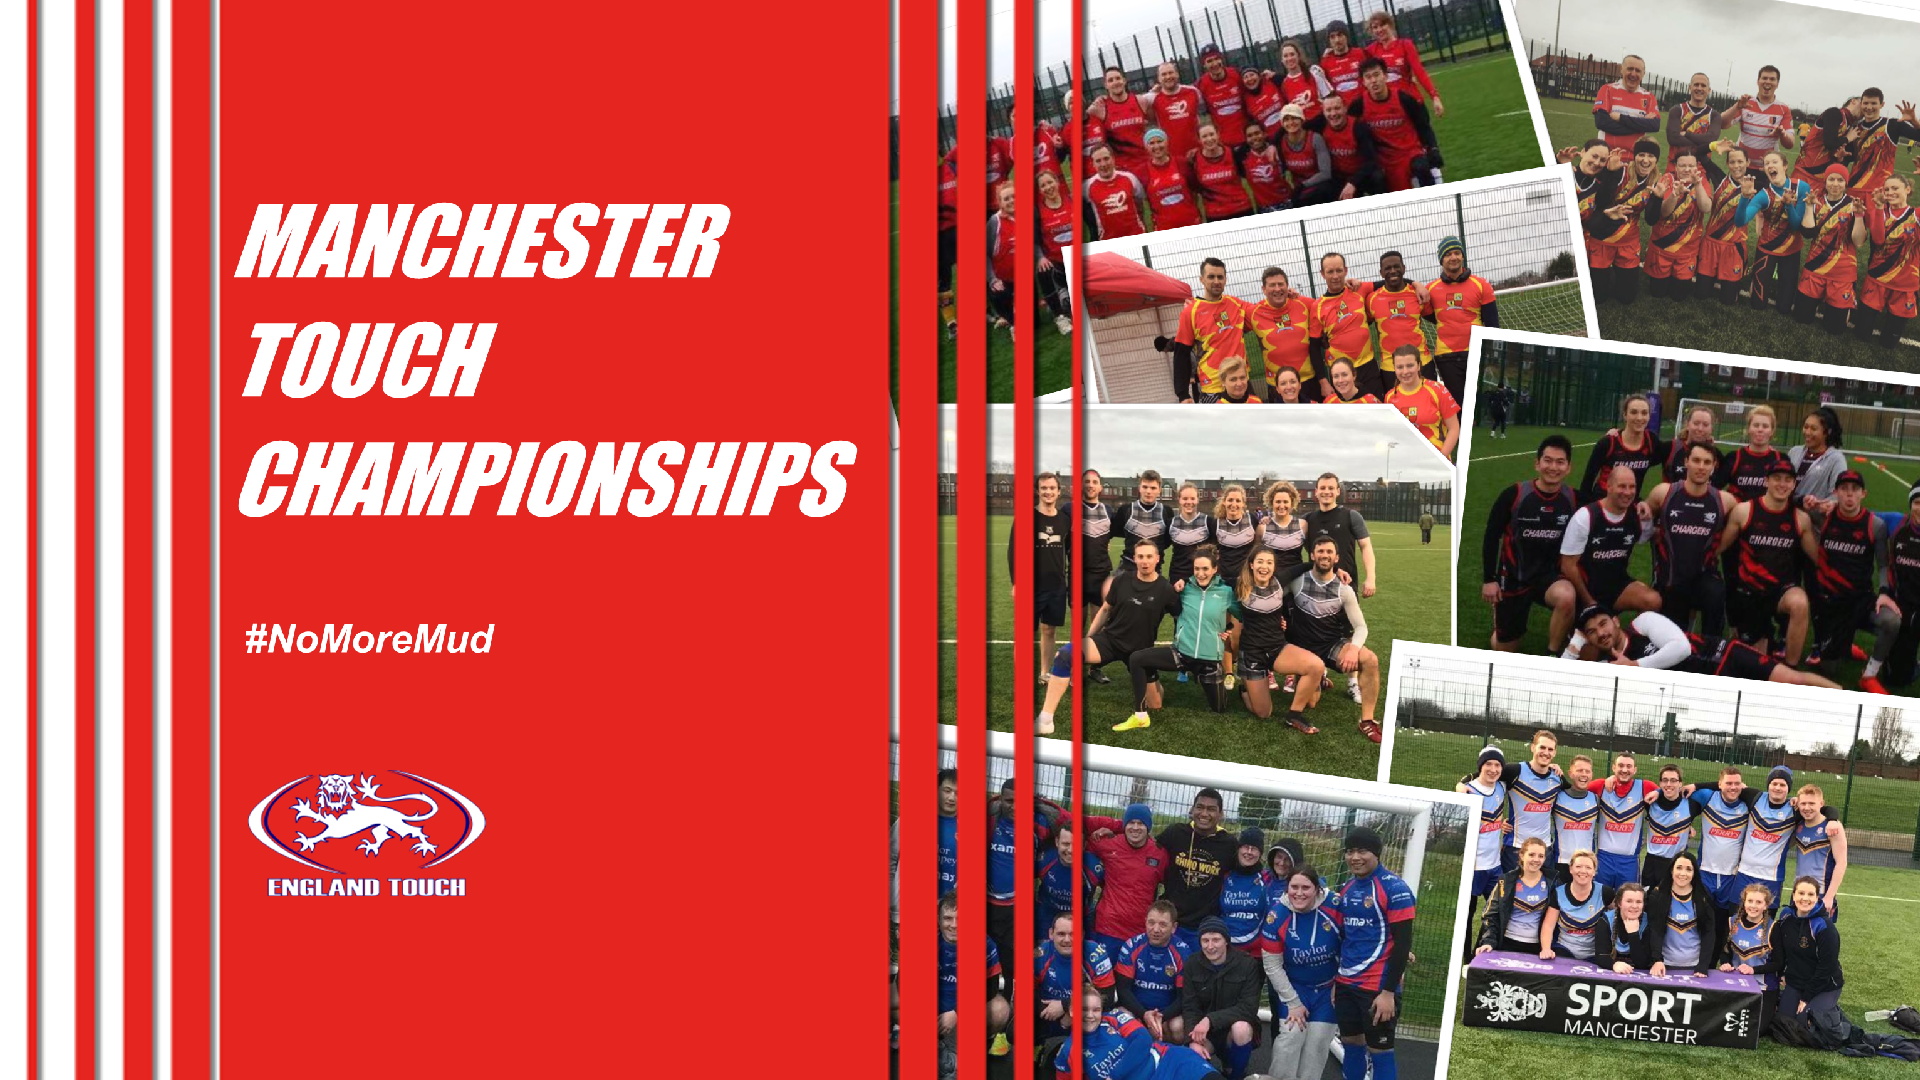 Manchester Touch Championships is a huge success